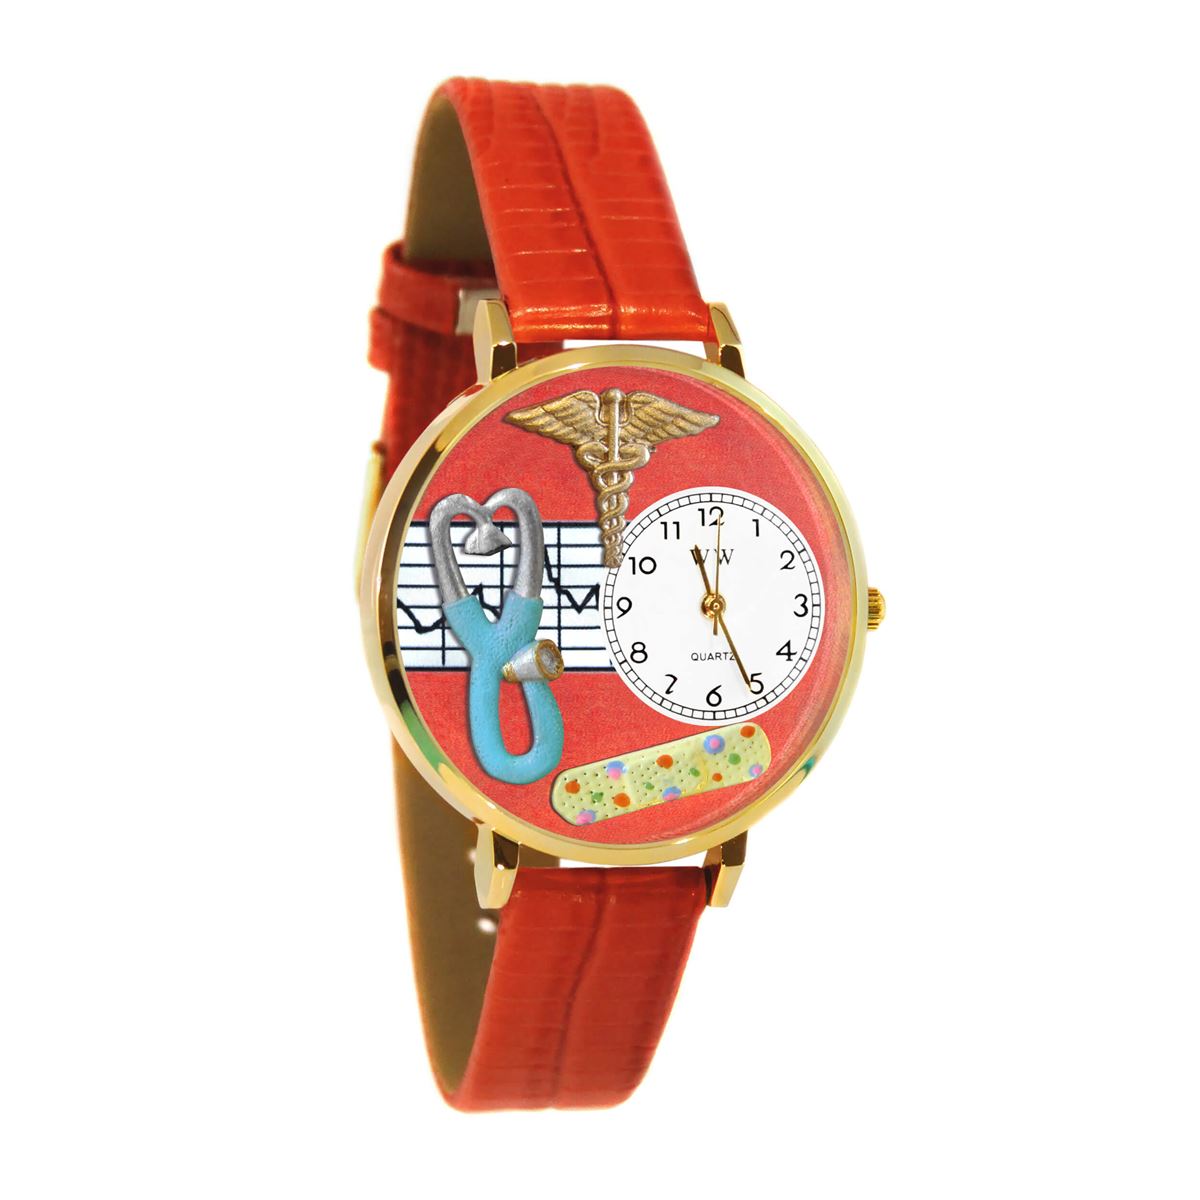 Whimsical Gifts | Nurse Stethoscope Red 3D Watch Large Style | Handmade in USA | Professions Themed | Nurse | Novelty Unique Fun Miniatures Gift | Gold Finish Red Leather Watch Band